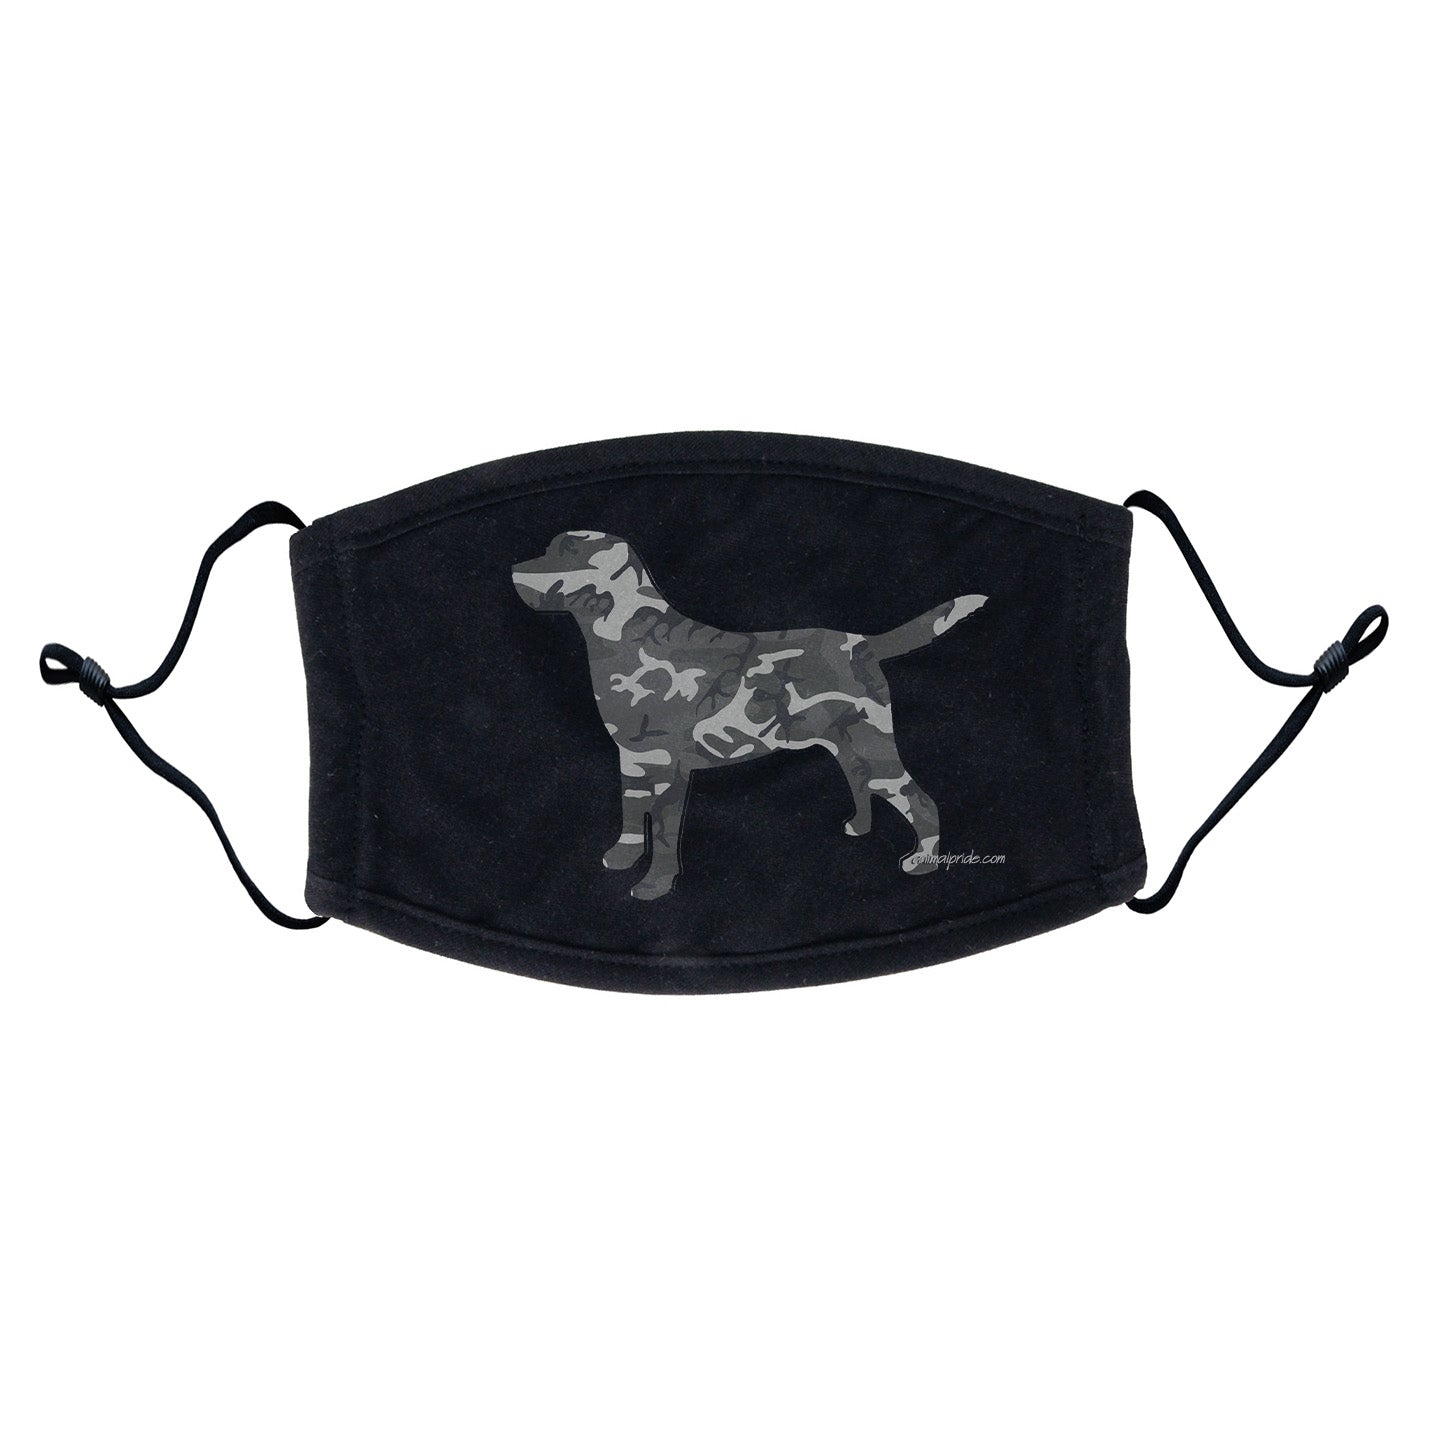 Labrador Silhouette Winter Camouflage Face Mask - Adjustable Ear Loops, Reusable & Washable, Cloth - Animal Pride